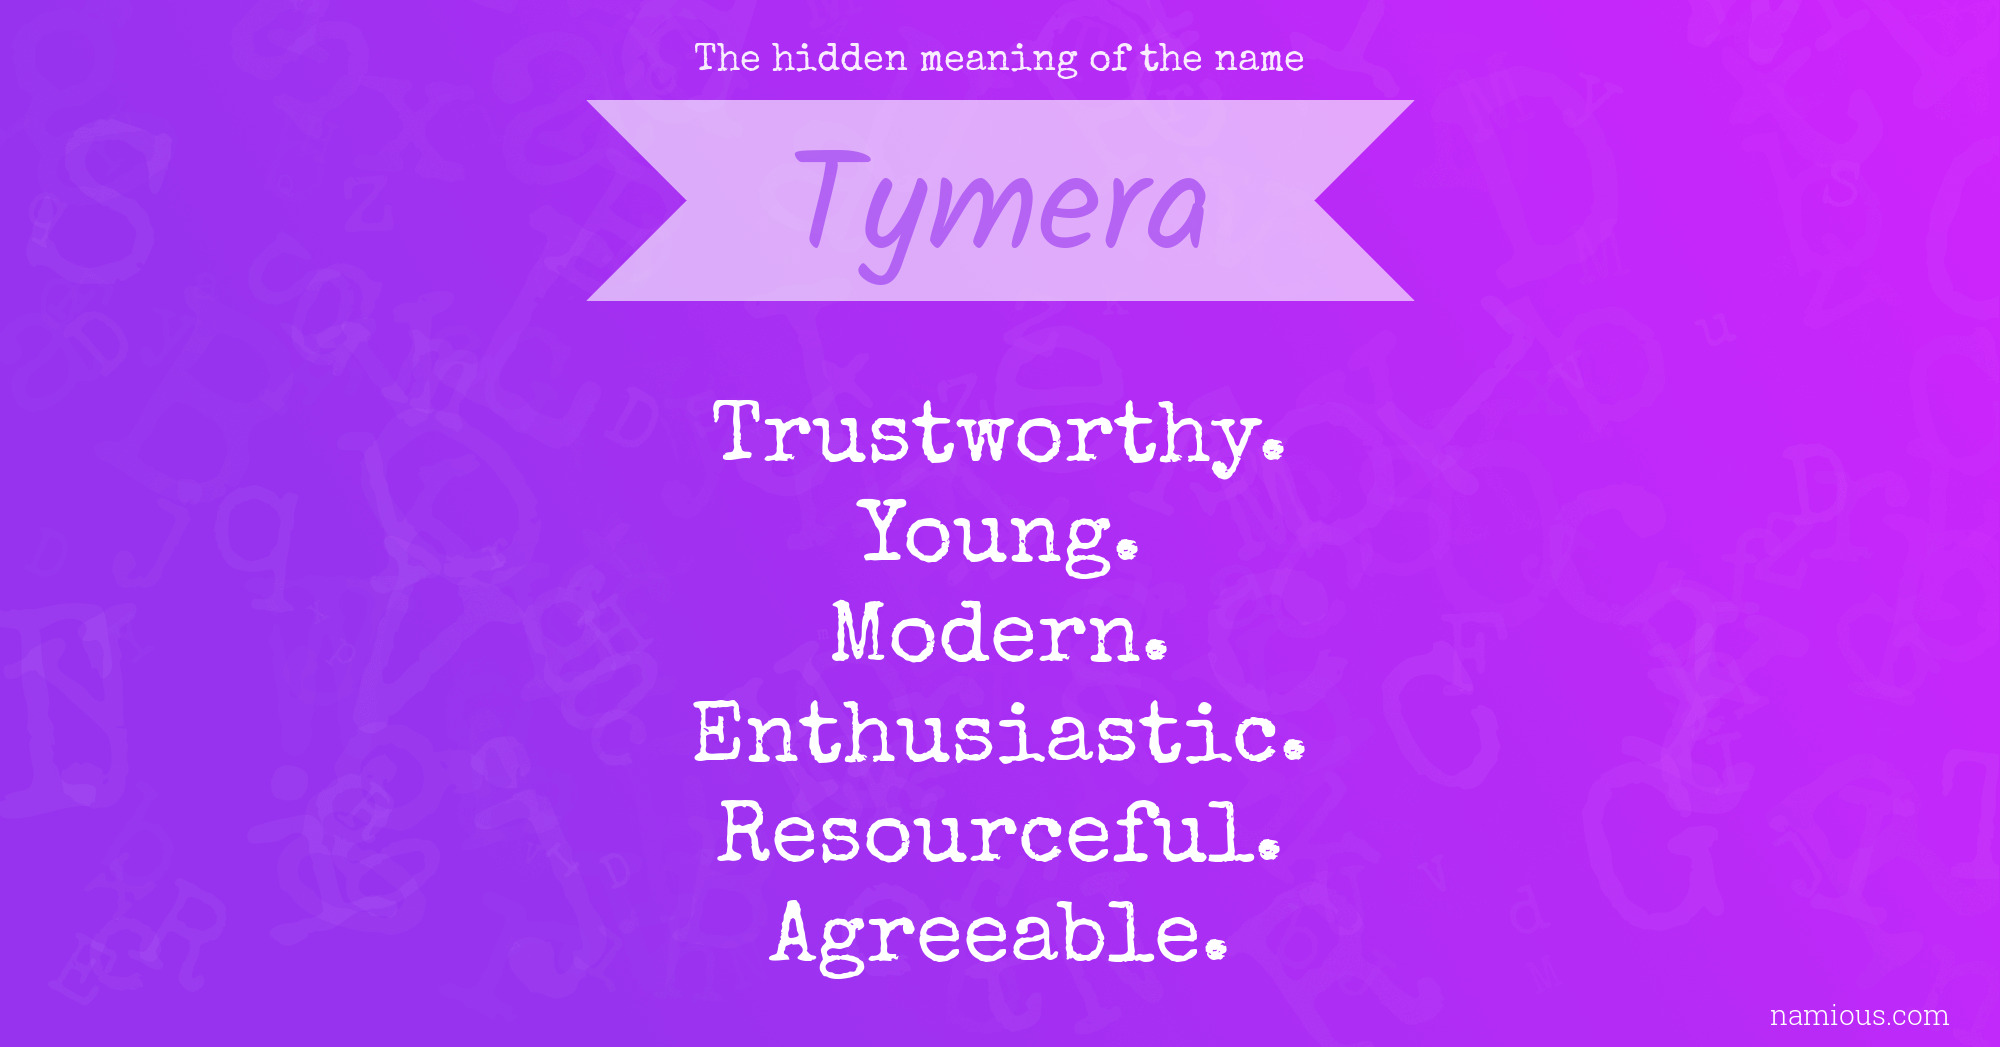 The hidden meaning of the name Tymera